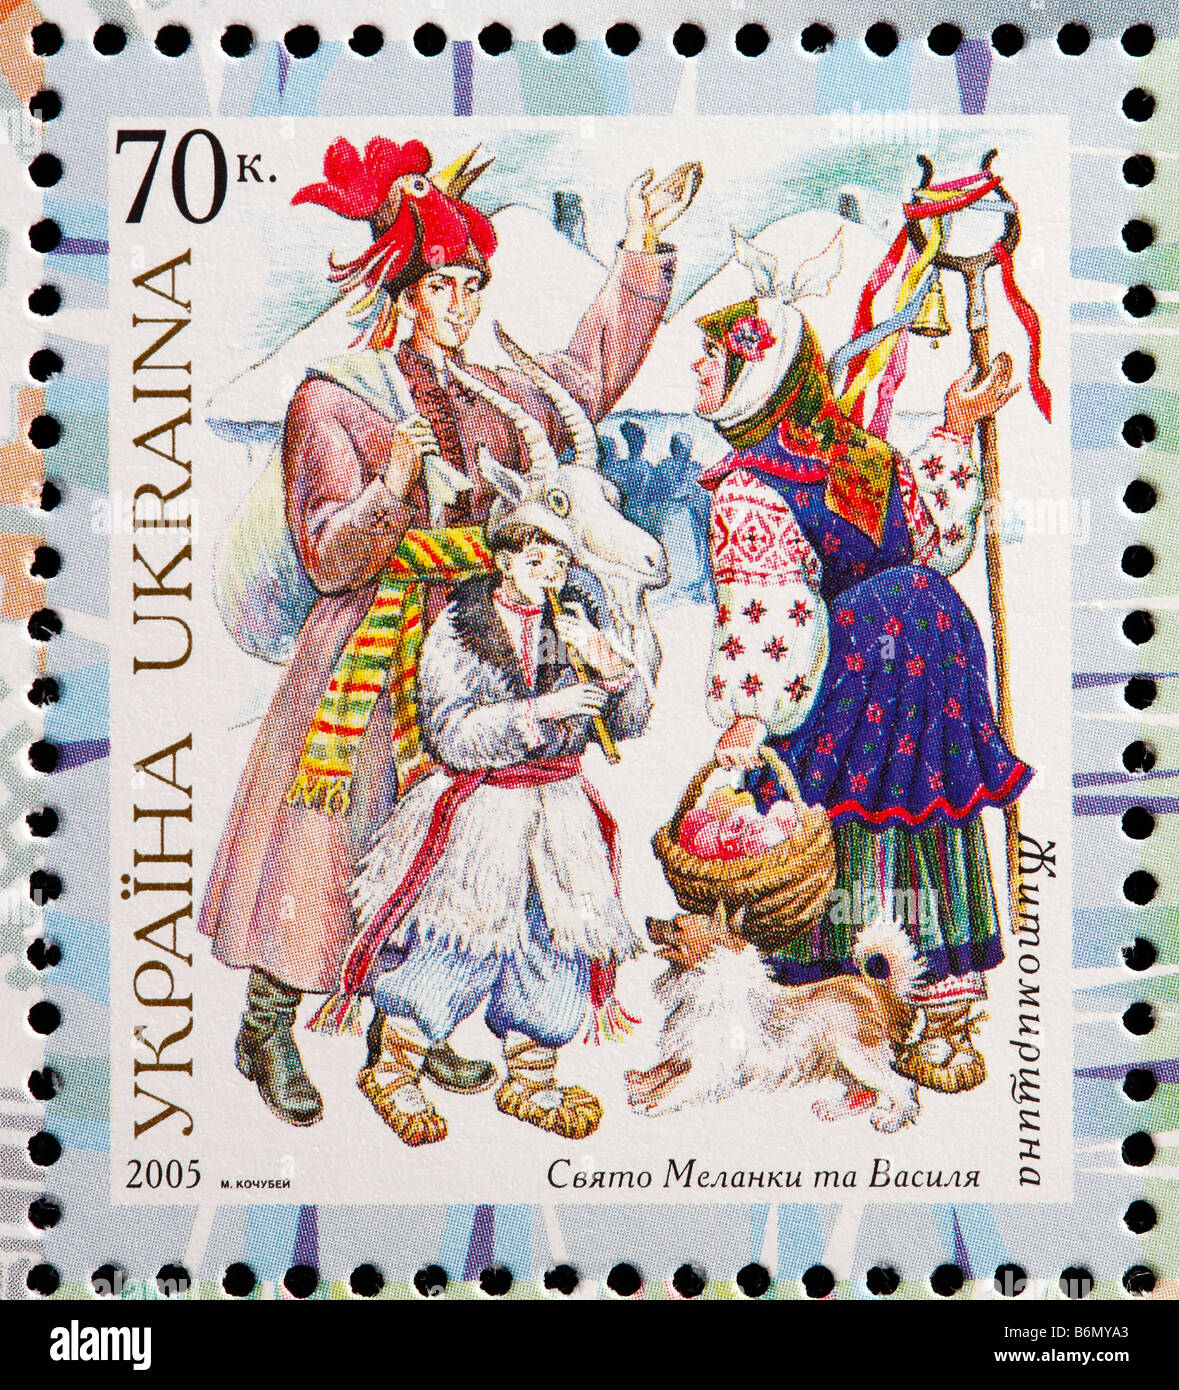 People in traditional costumes, Ukrainian national holiday, Zhitomir region, postage stamp, Ukraine, 2005 Stock Photo